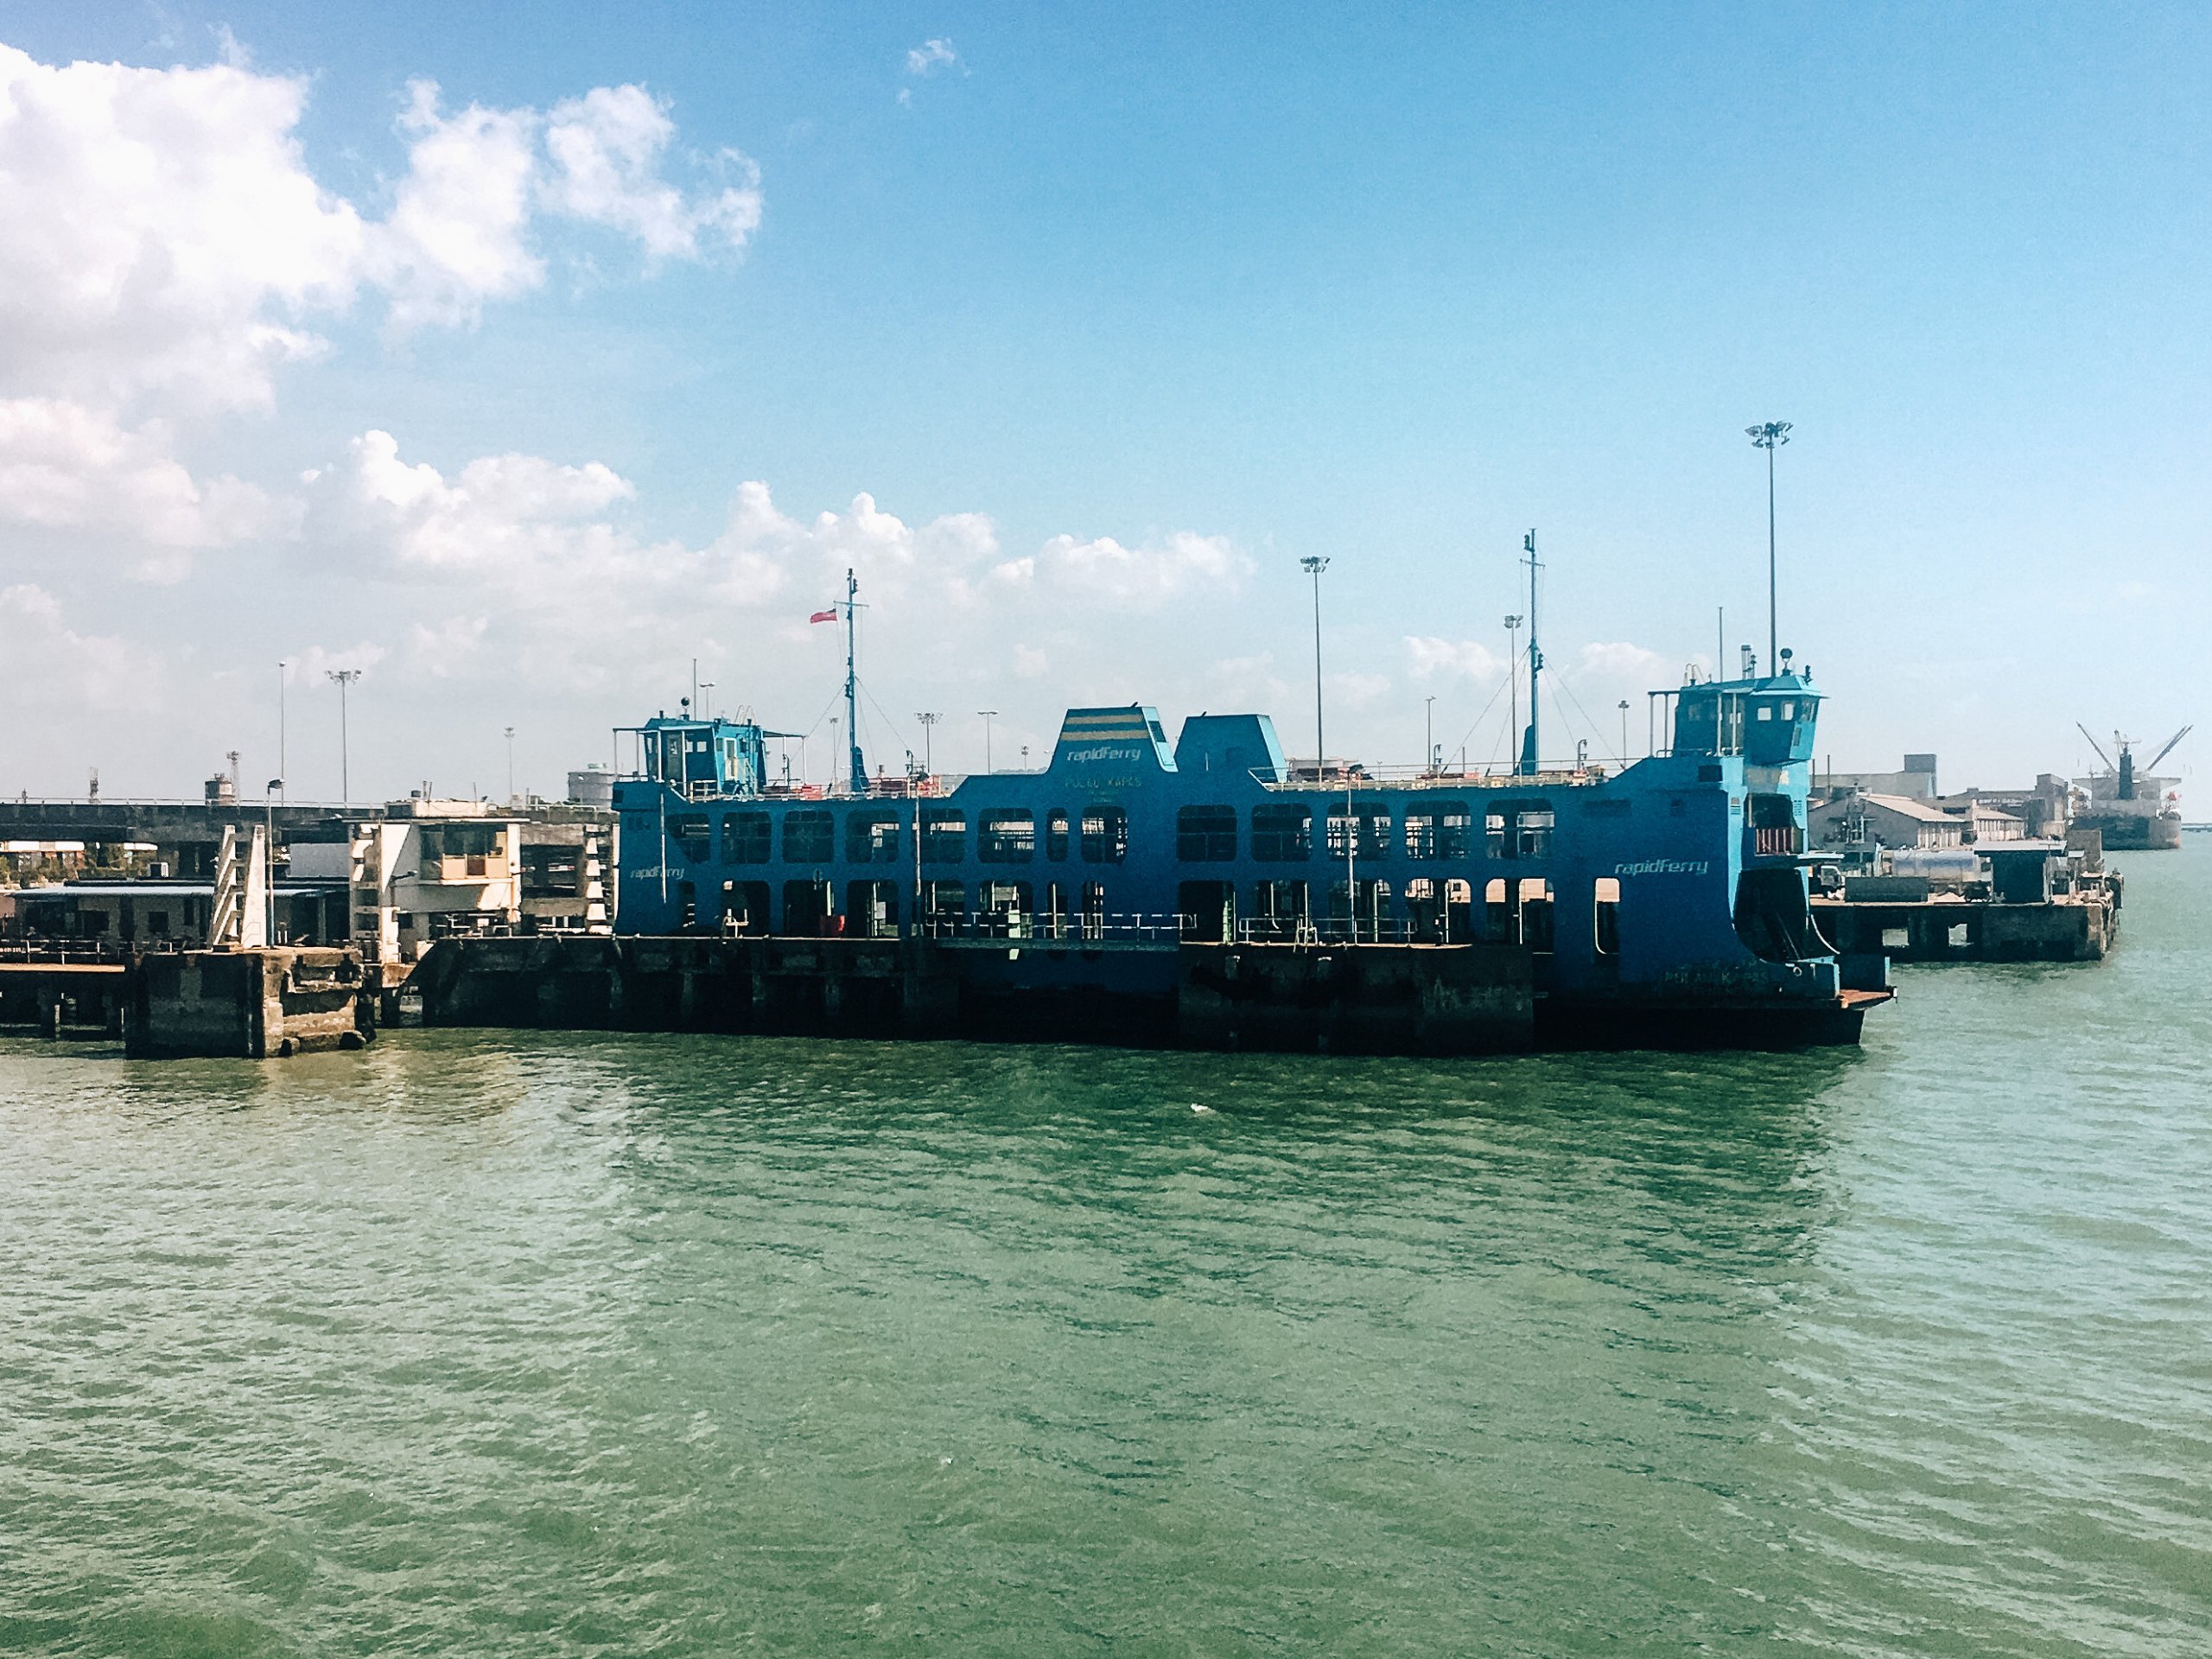 Ferry from Butterworth to George Town